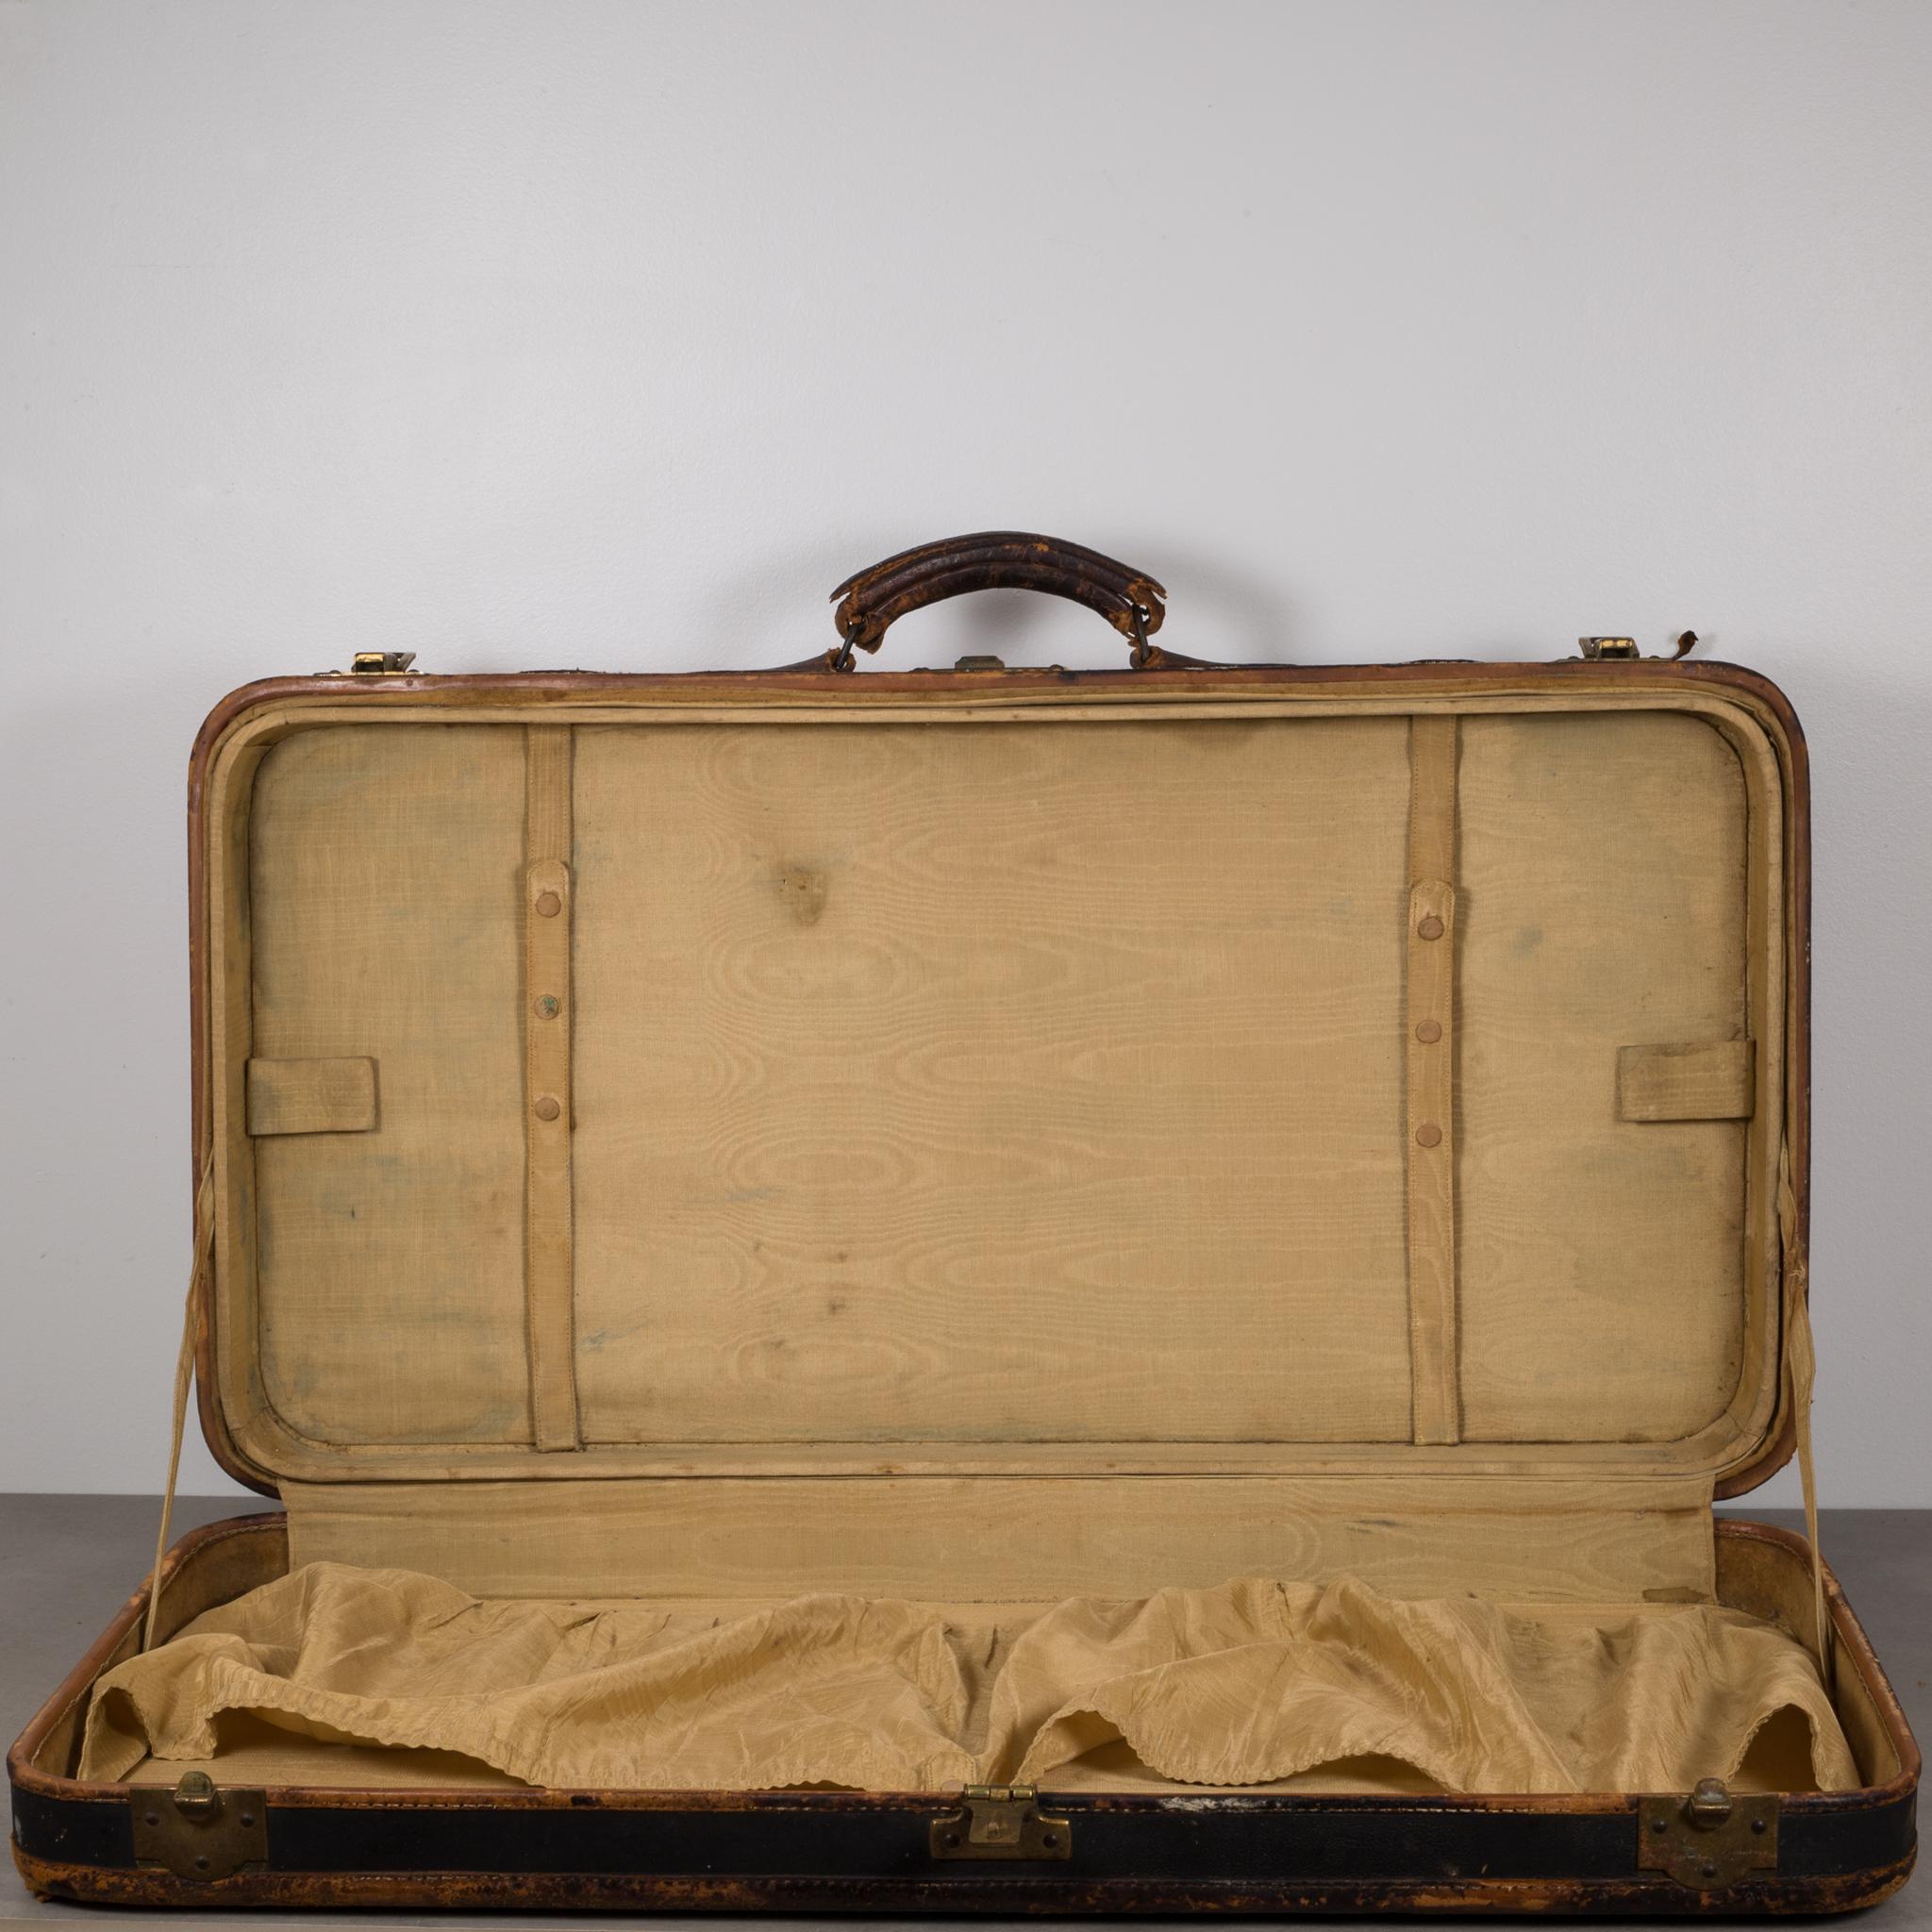 Brass Antique French Suitcase with Original Travel Stickers, circa 1900-1930